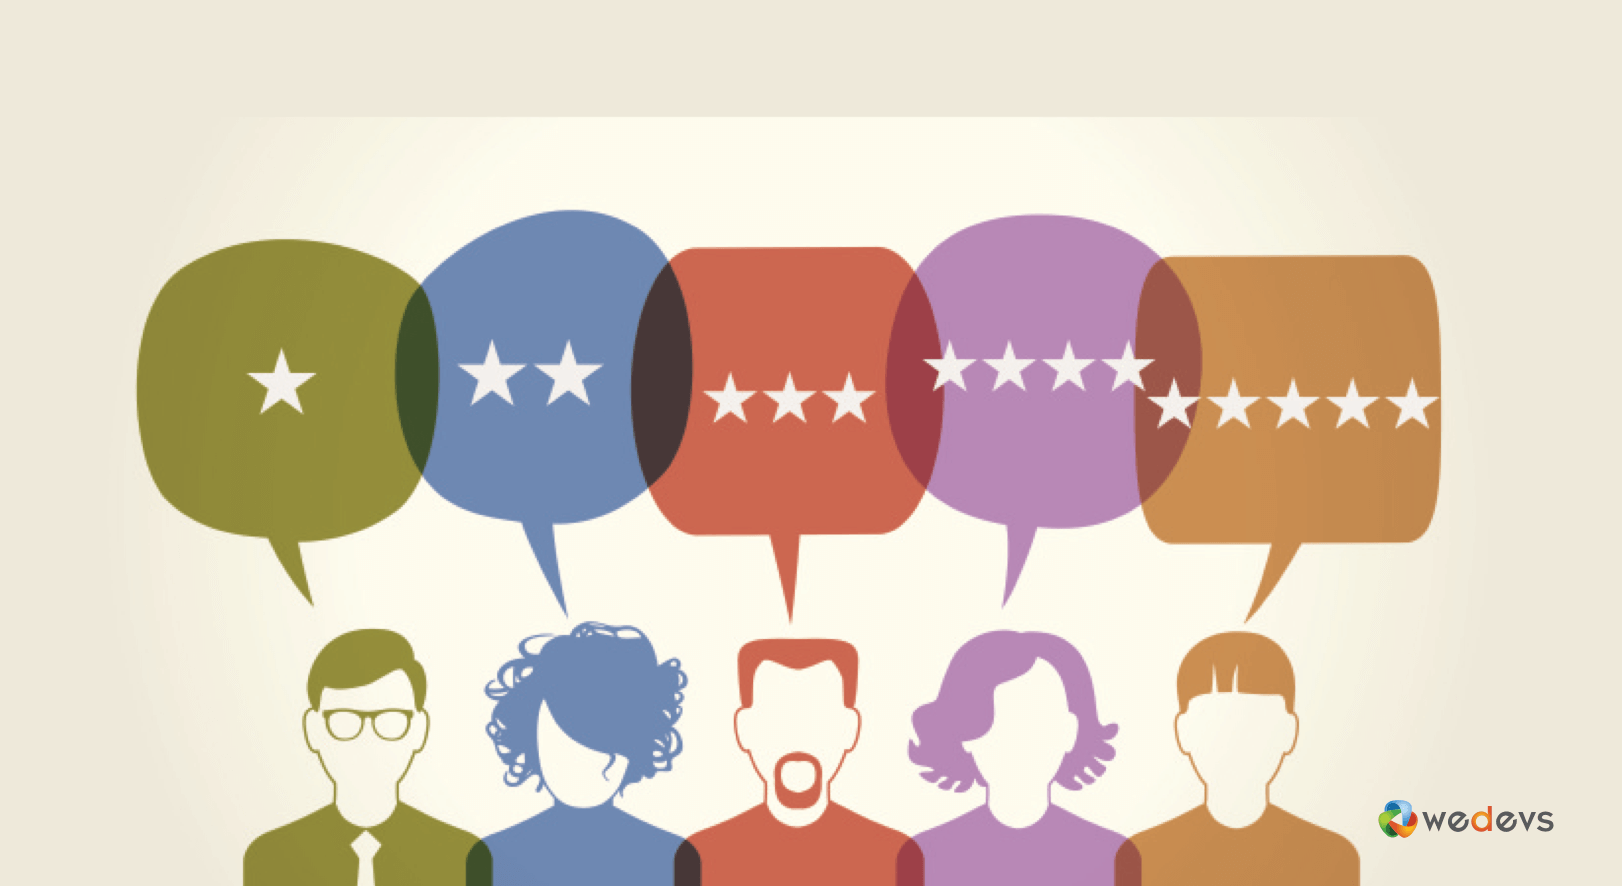 How to Use Product Review to Increase Popularity and Sales